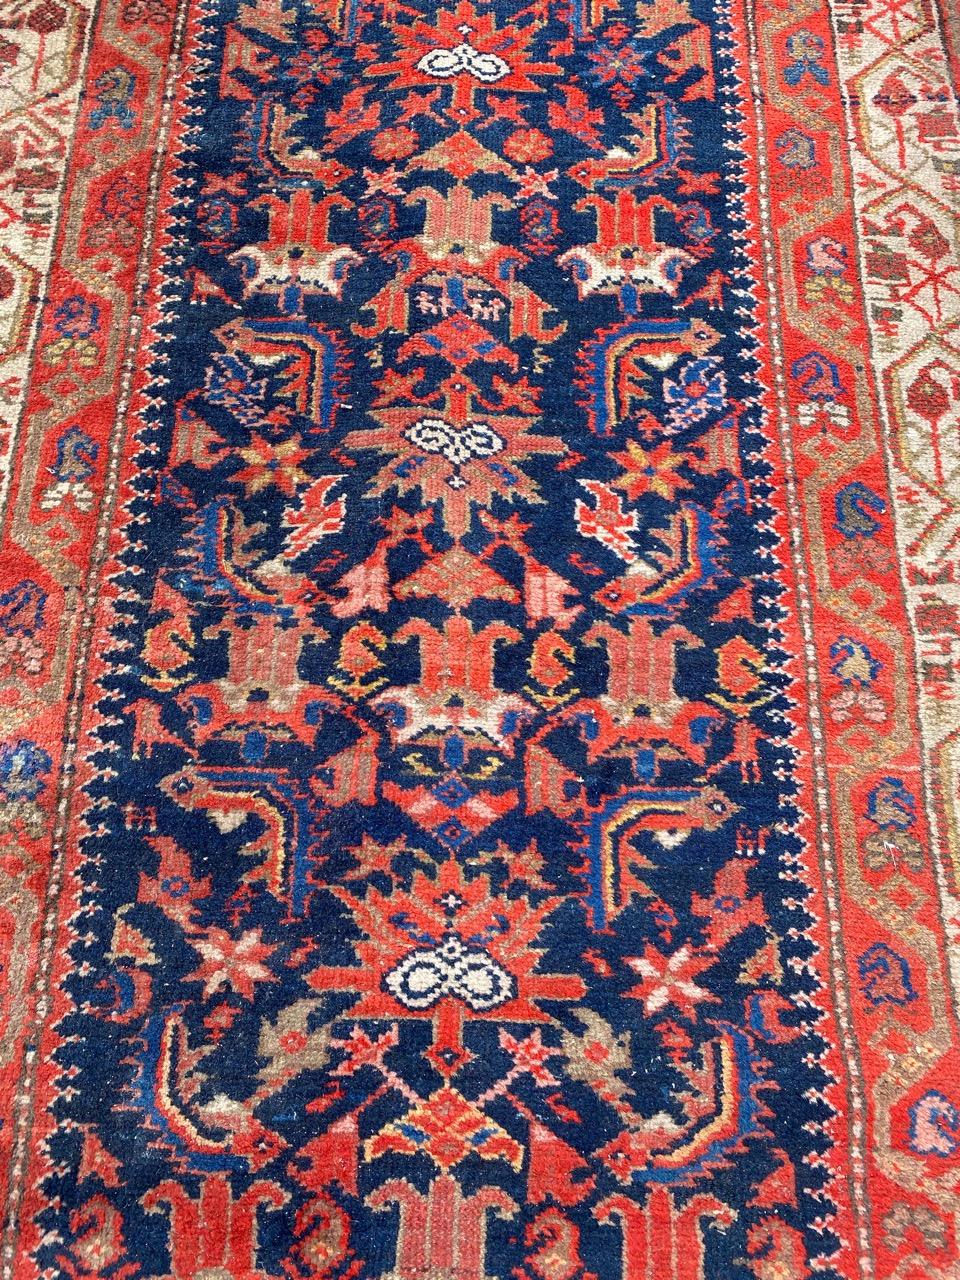 Cotton Bobyrug’s Pretty Antique Malayer Runner For Sale